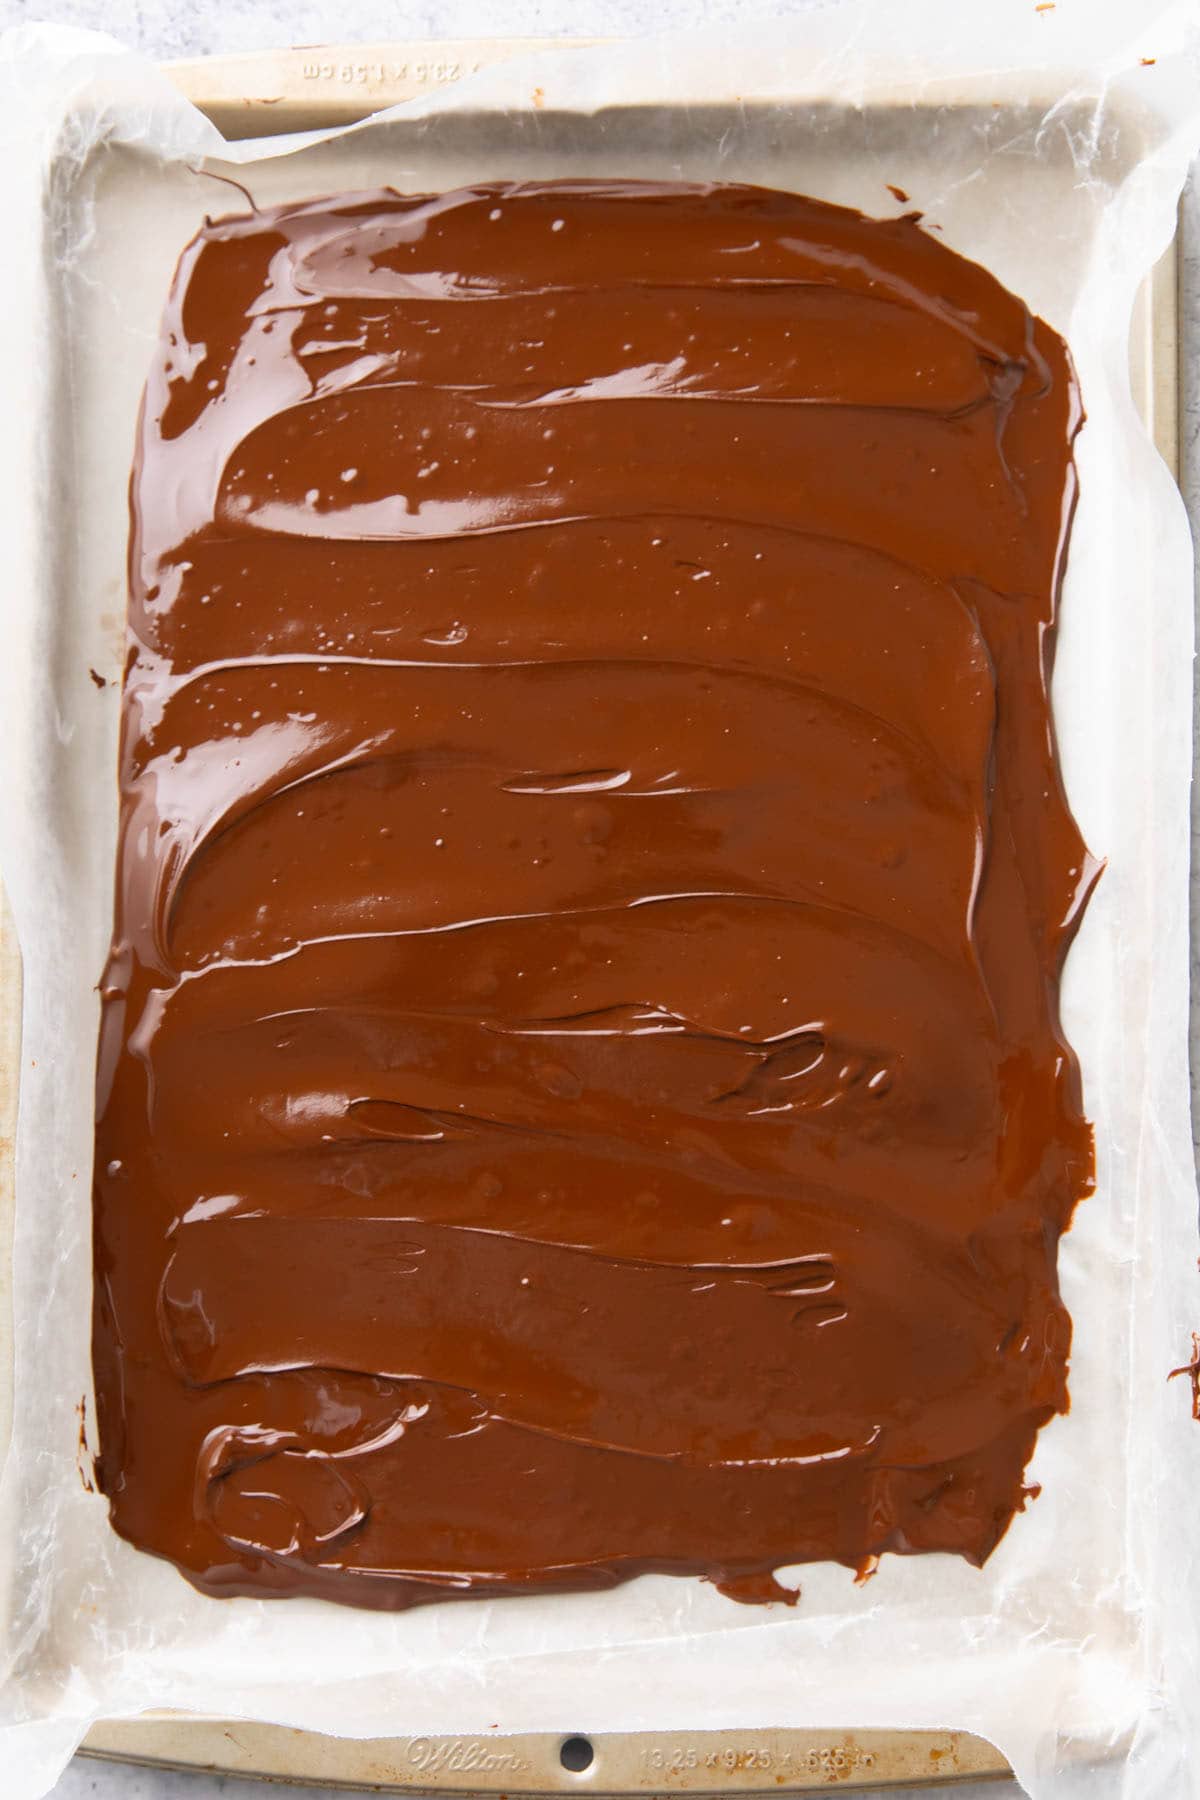 Melted chocolate spread into one even layer on the lined baking sheet